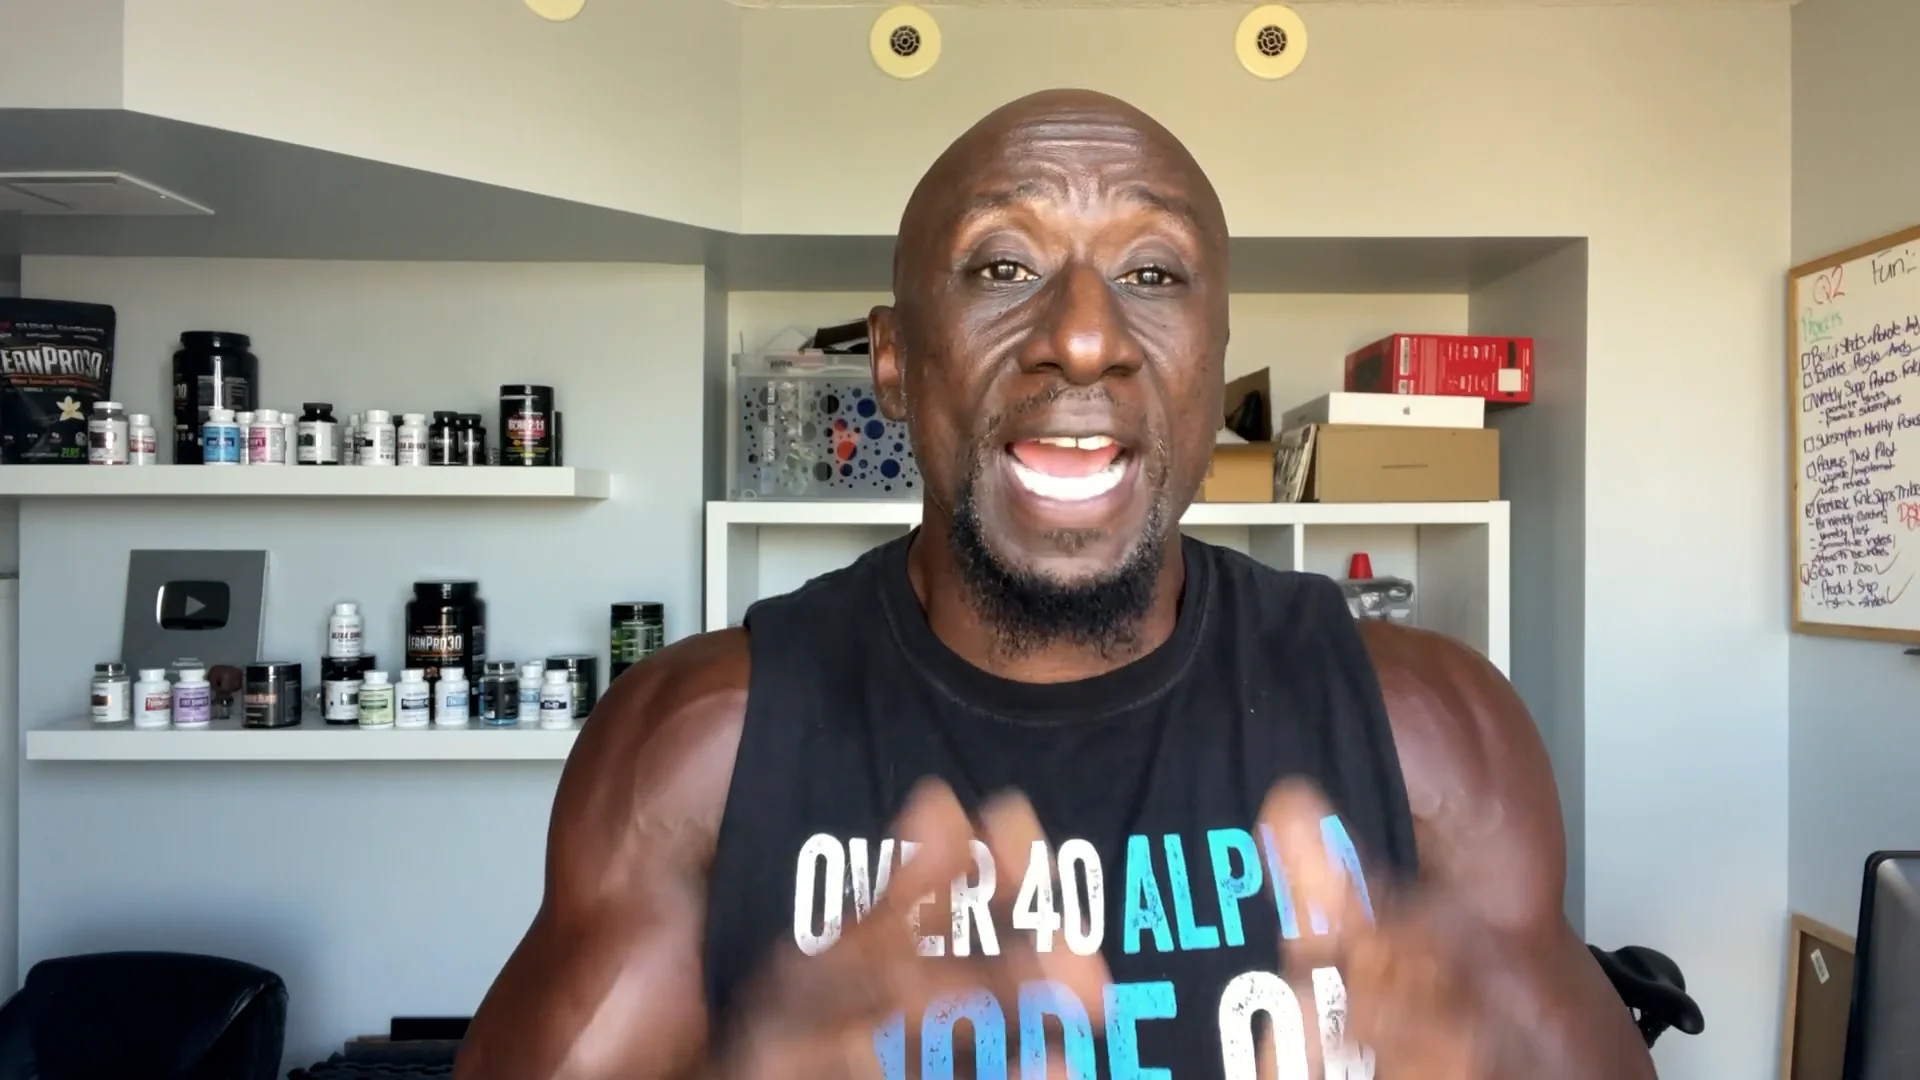 Over 40 Alpha Workout and Nutrition Program on Vimeo